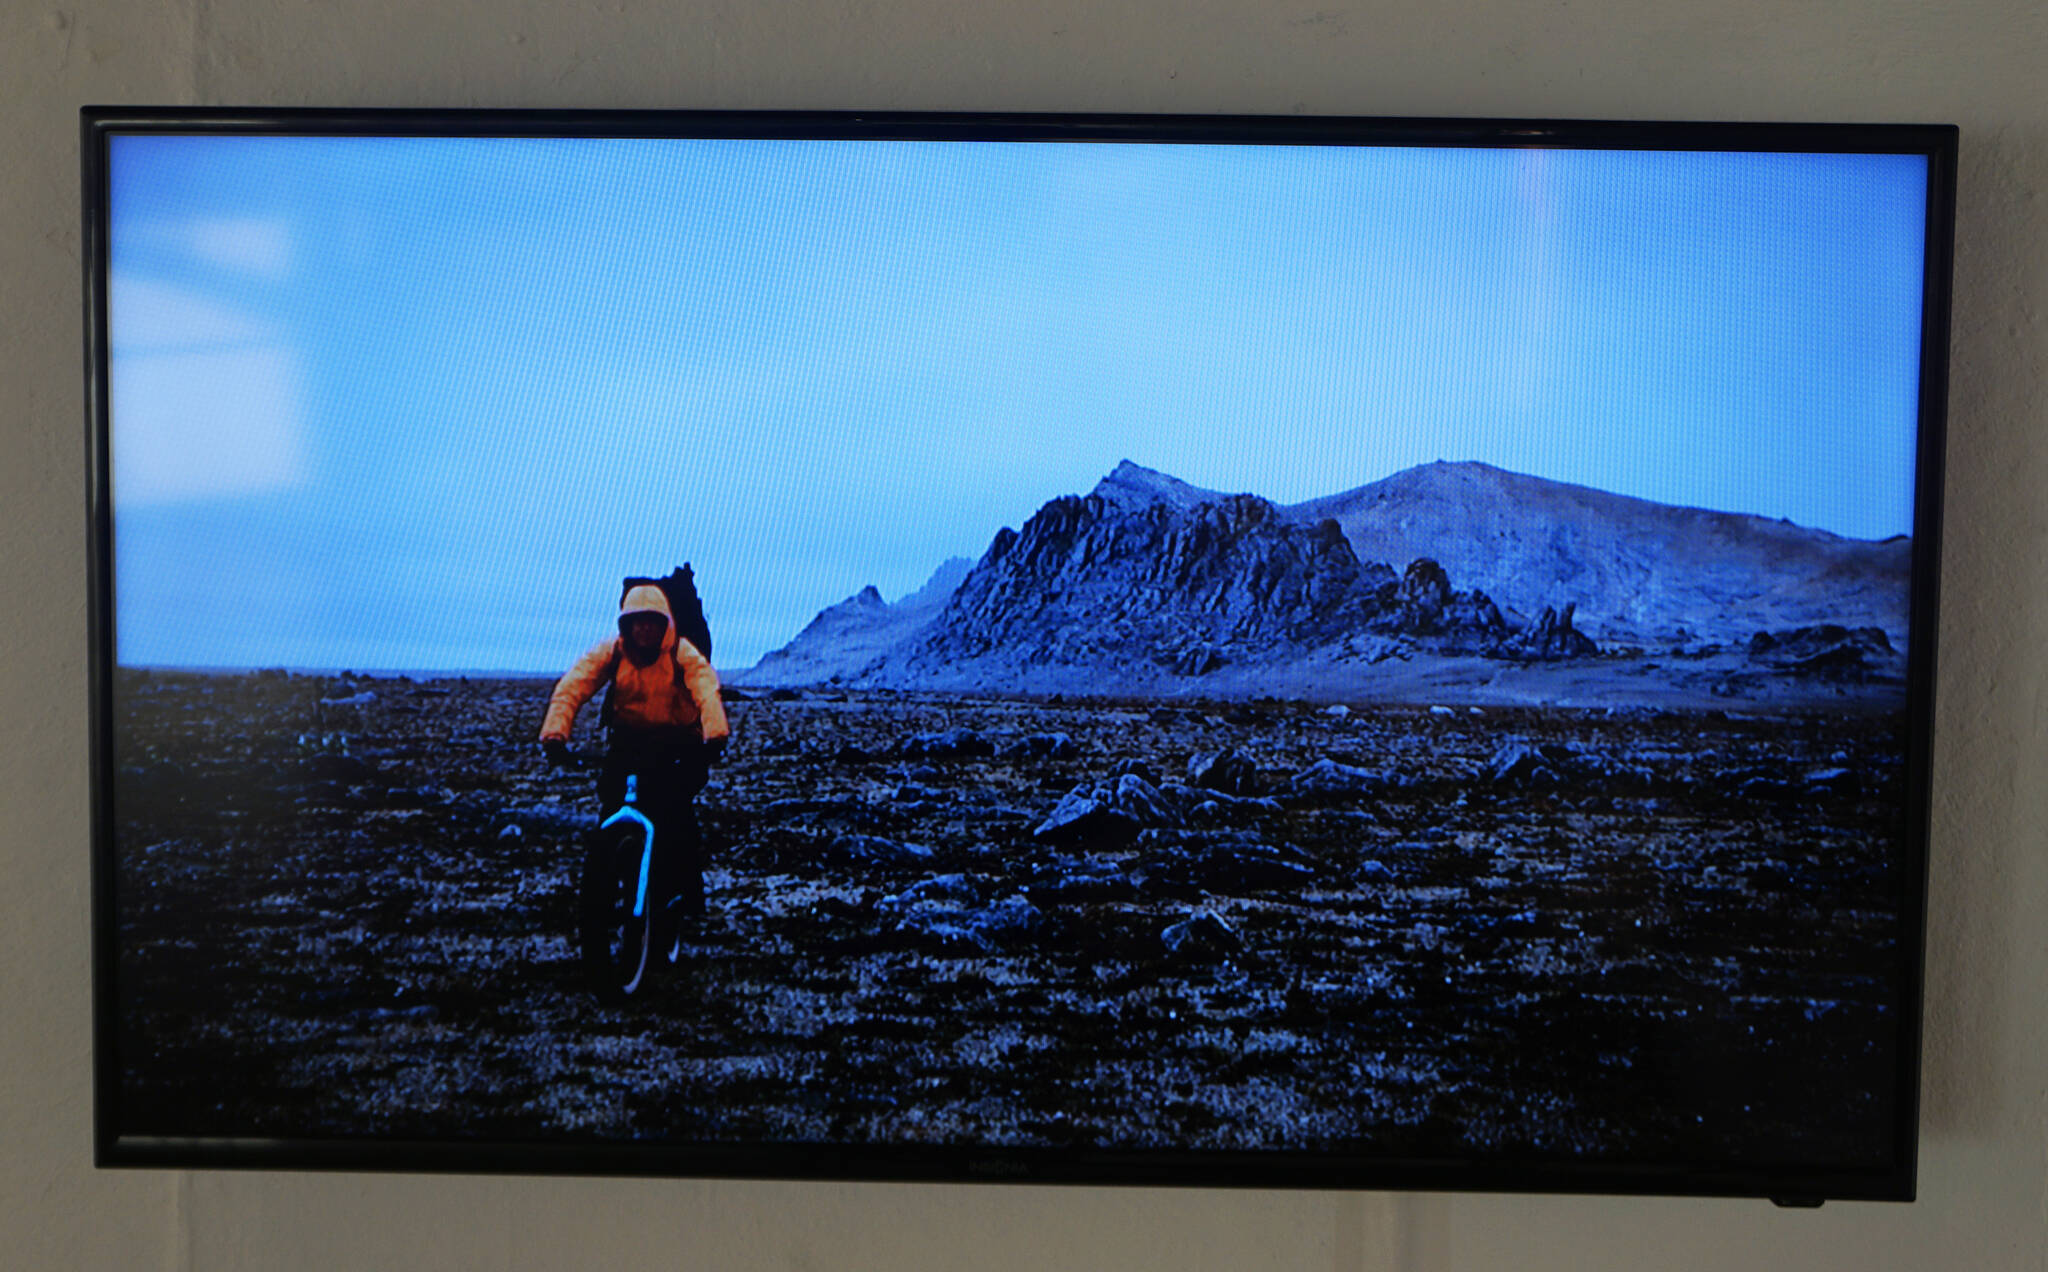 Kim McNett’s exhibit at Bunnell Street Arts Center a video done by her partner, Bjørn Olson, of their travels throughout Alaska. The show continues through Dec. 24, 2021, at the gallery in Homer, Alaska. (Photo by Michael Armstrong/Homer News)